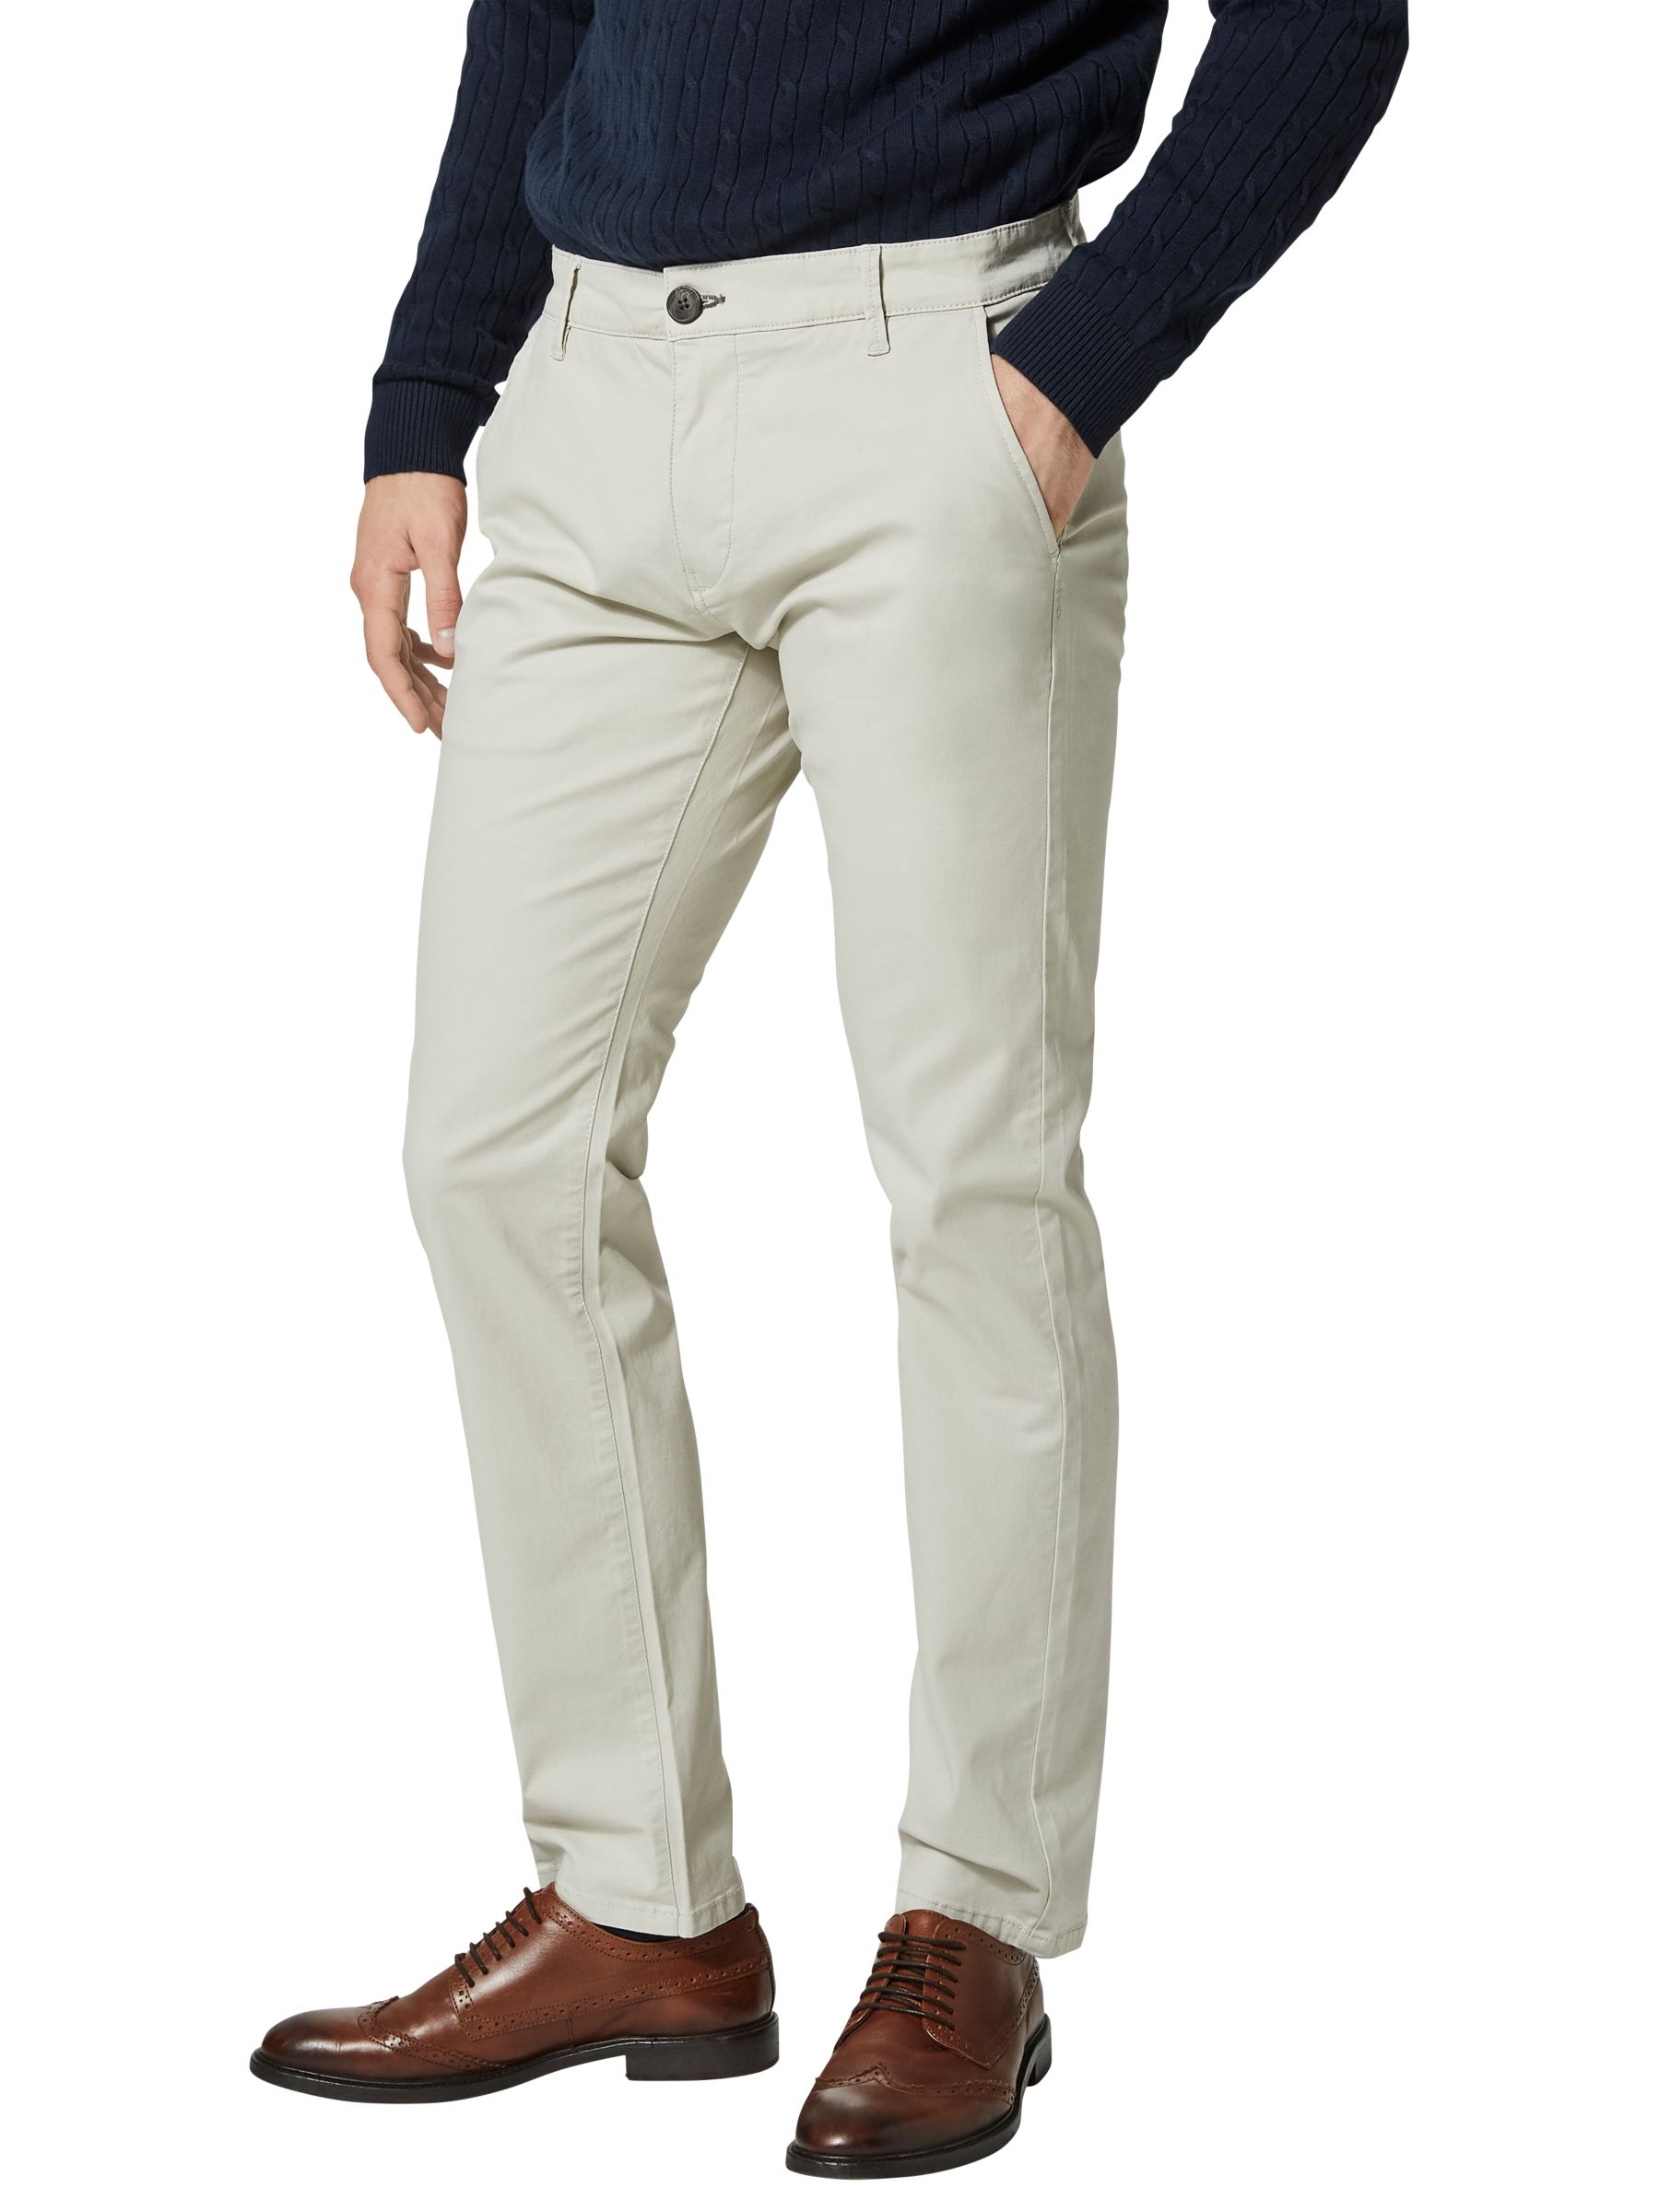 Selected Homme Three Paris Chinos at John Lewis & Partners